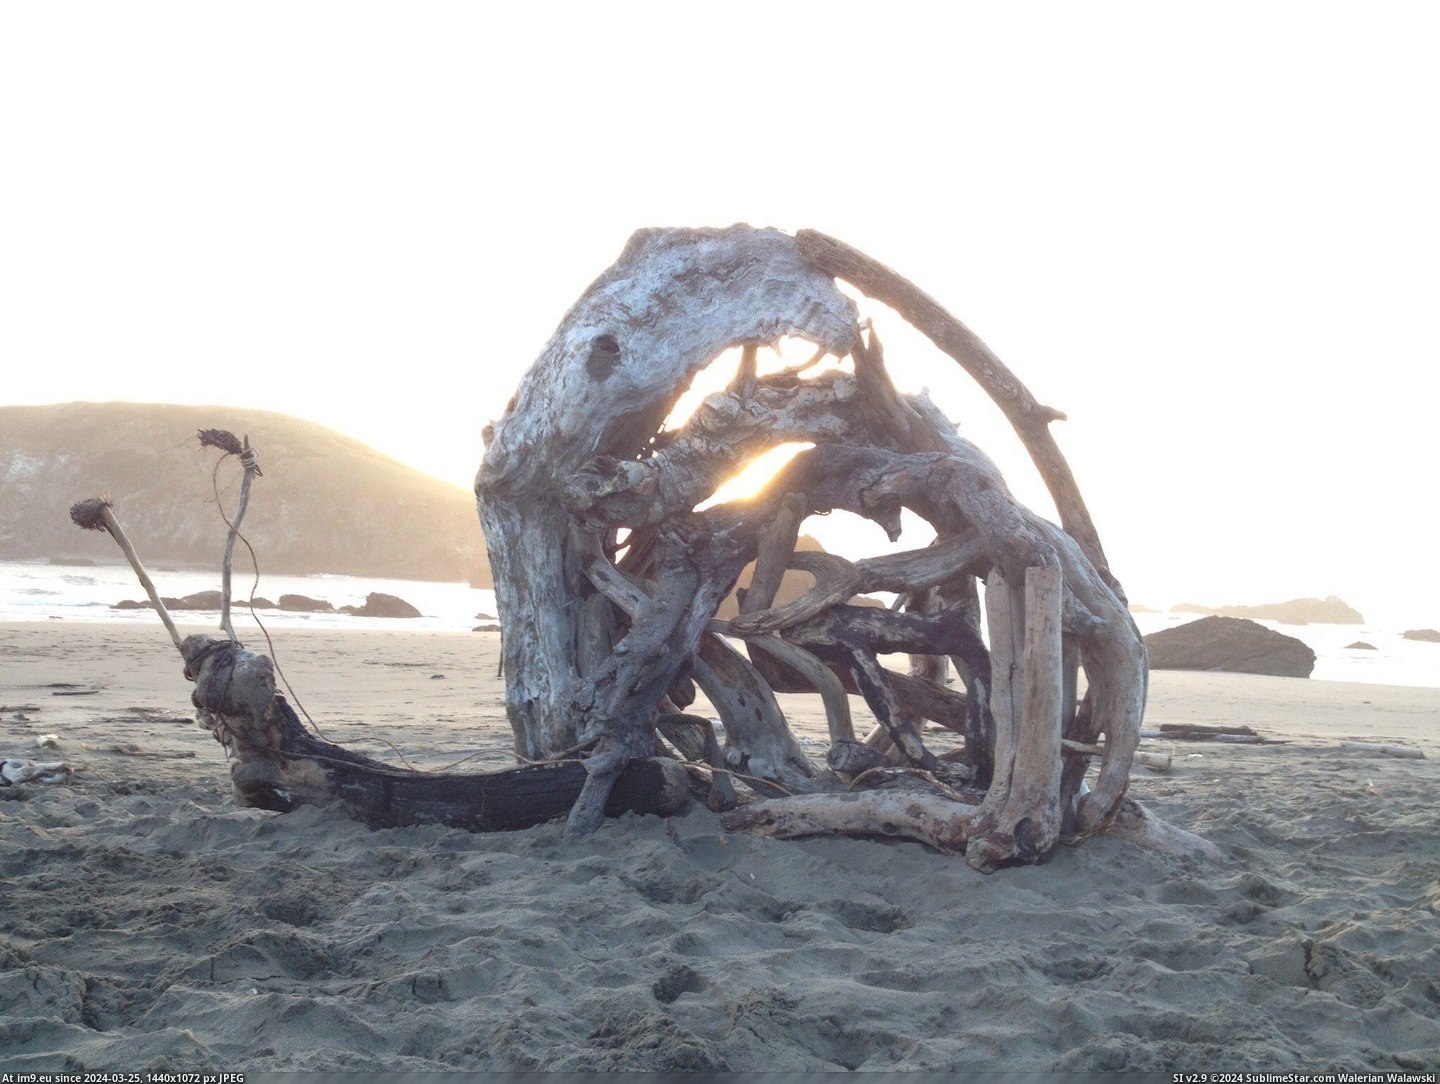 #Brother #Oregon #Driftwood #Shore #Snail [Pics] My brother made this snail in Oregon with driftwood and whatever he found on shore. Pic. (Image of album My r/PICS favs))